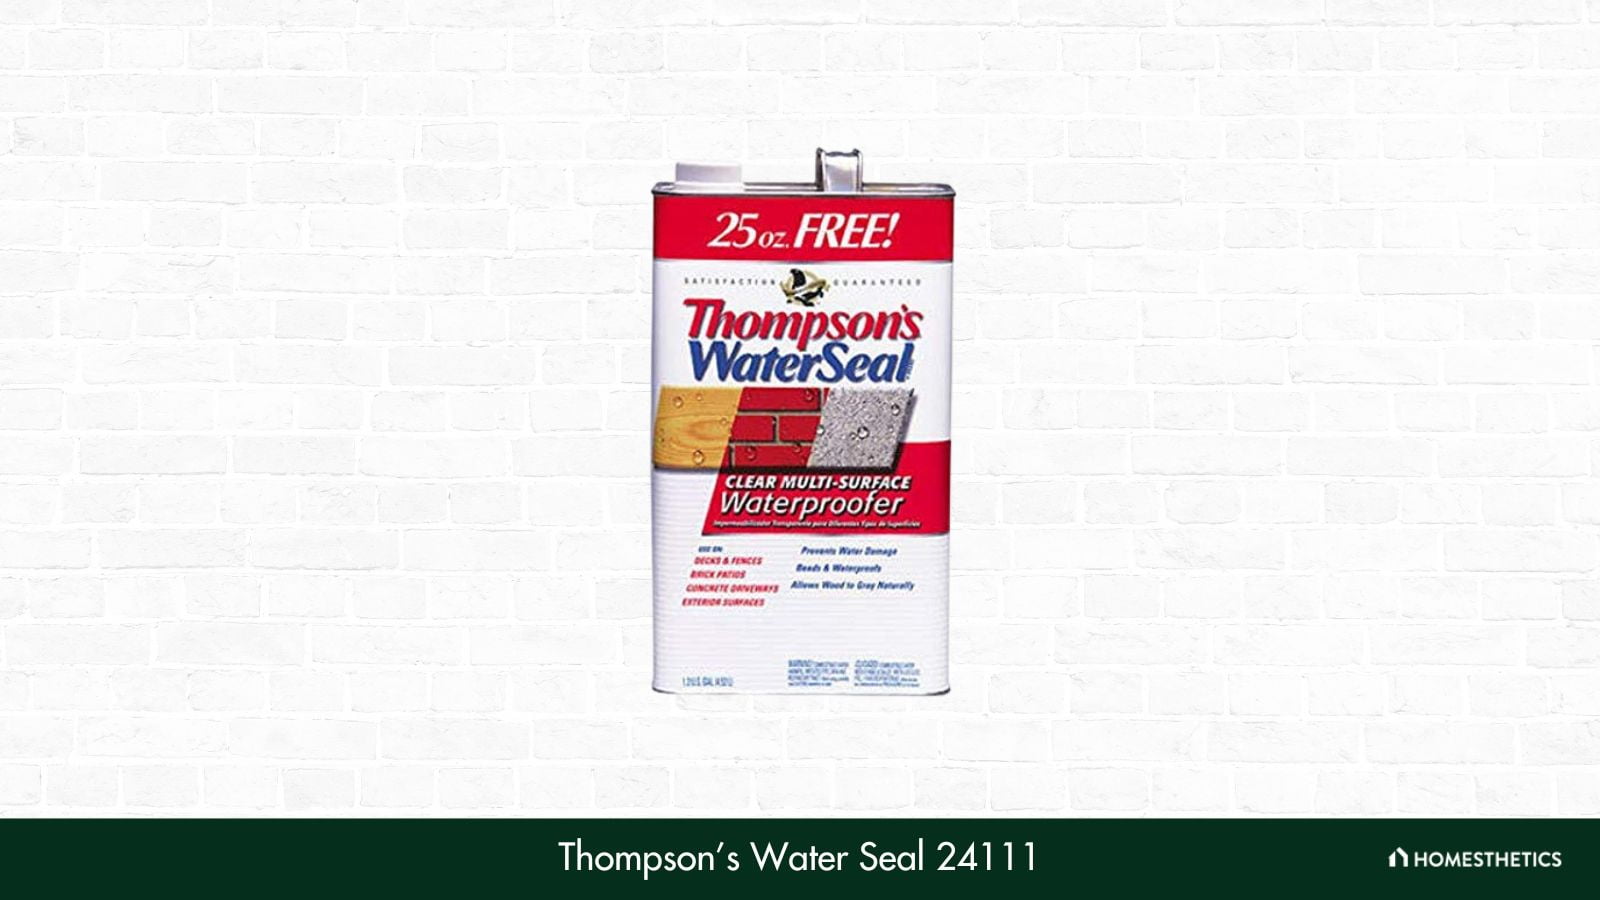 Thompsons Water Seal 24111